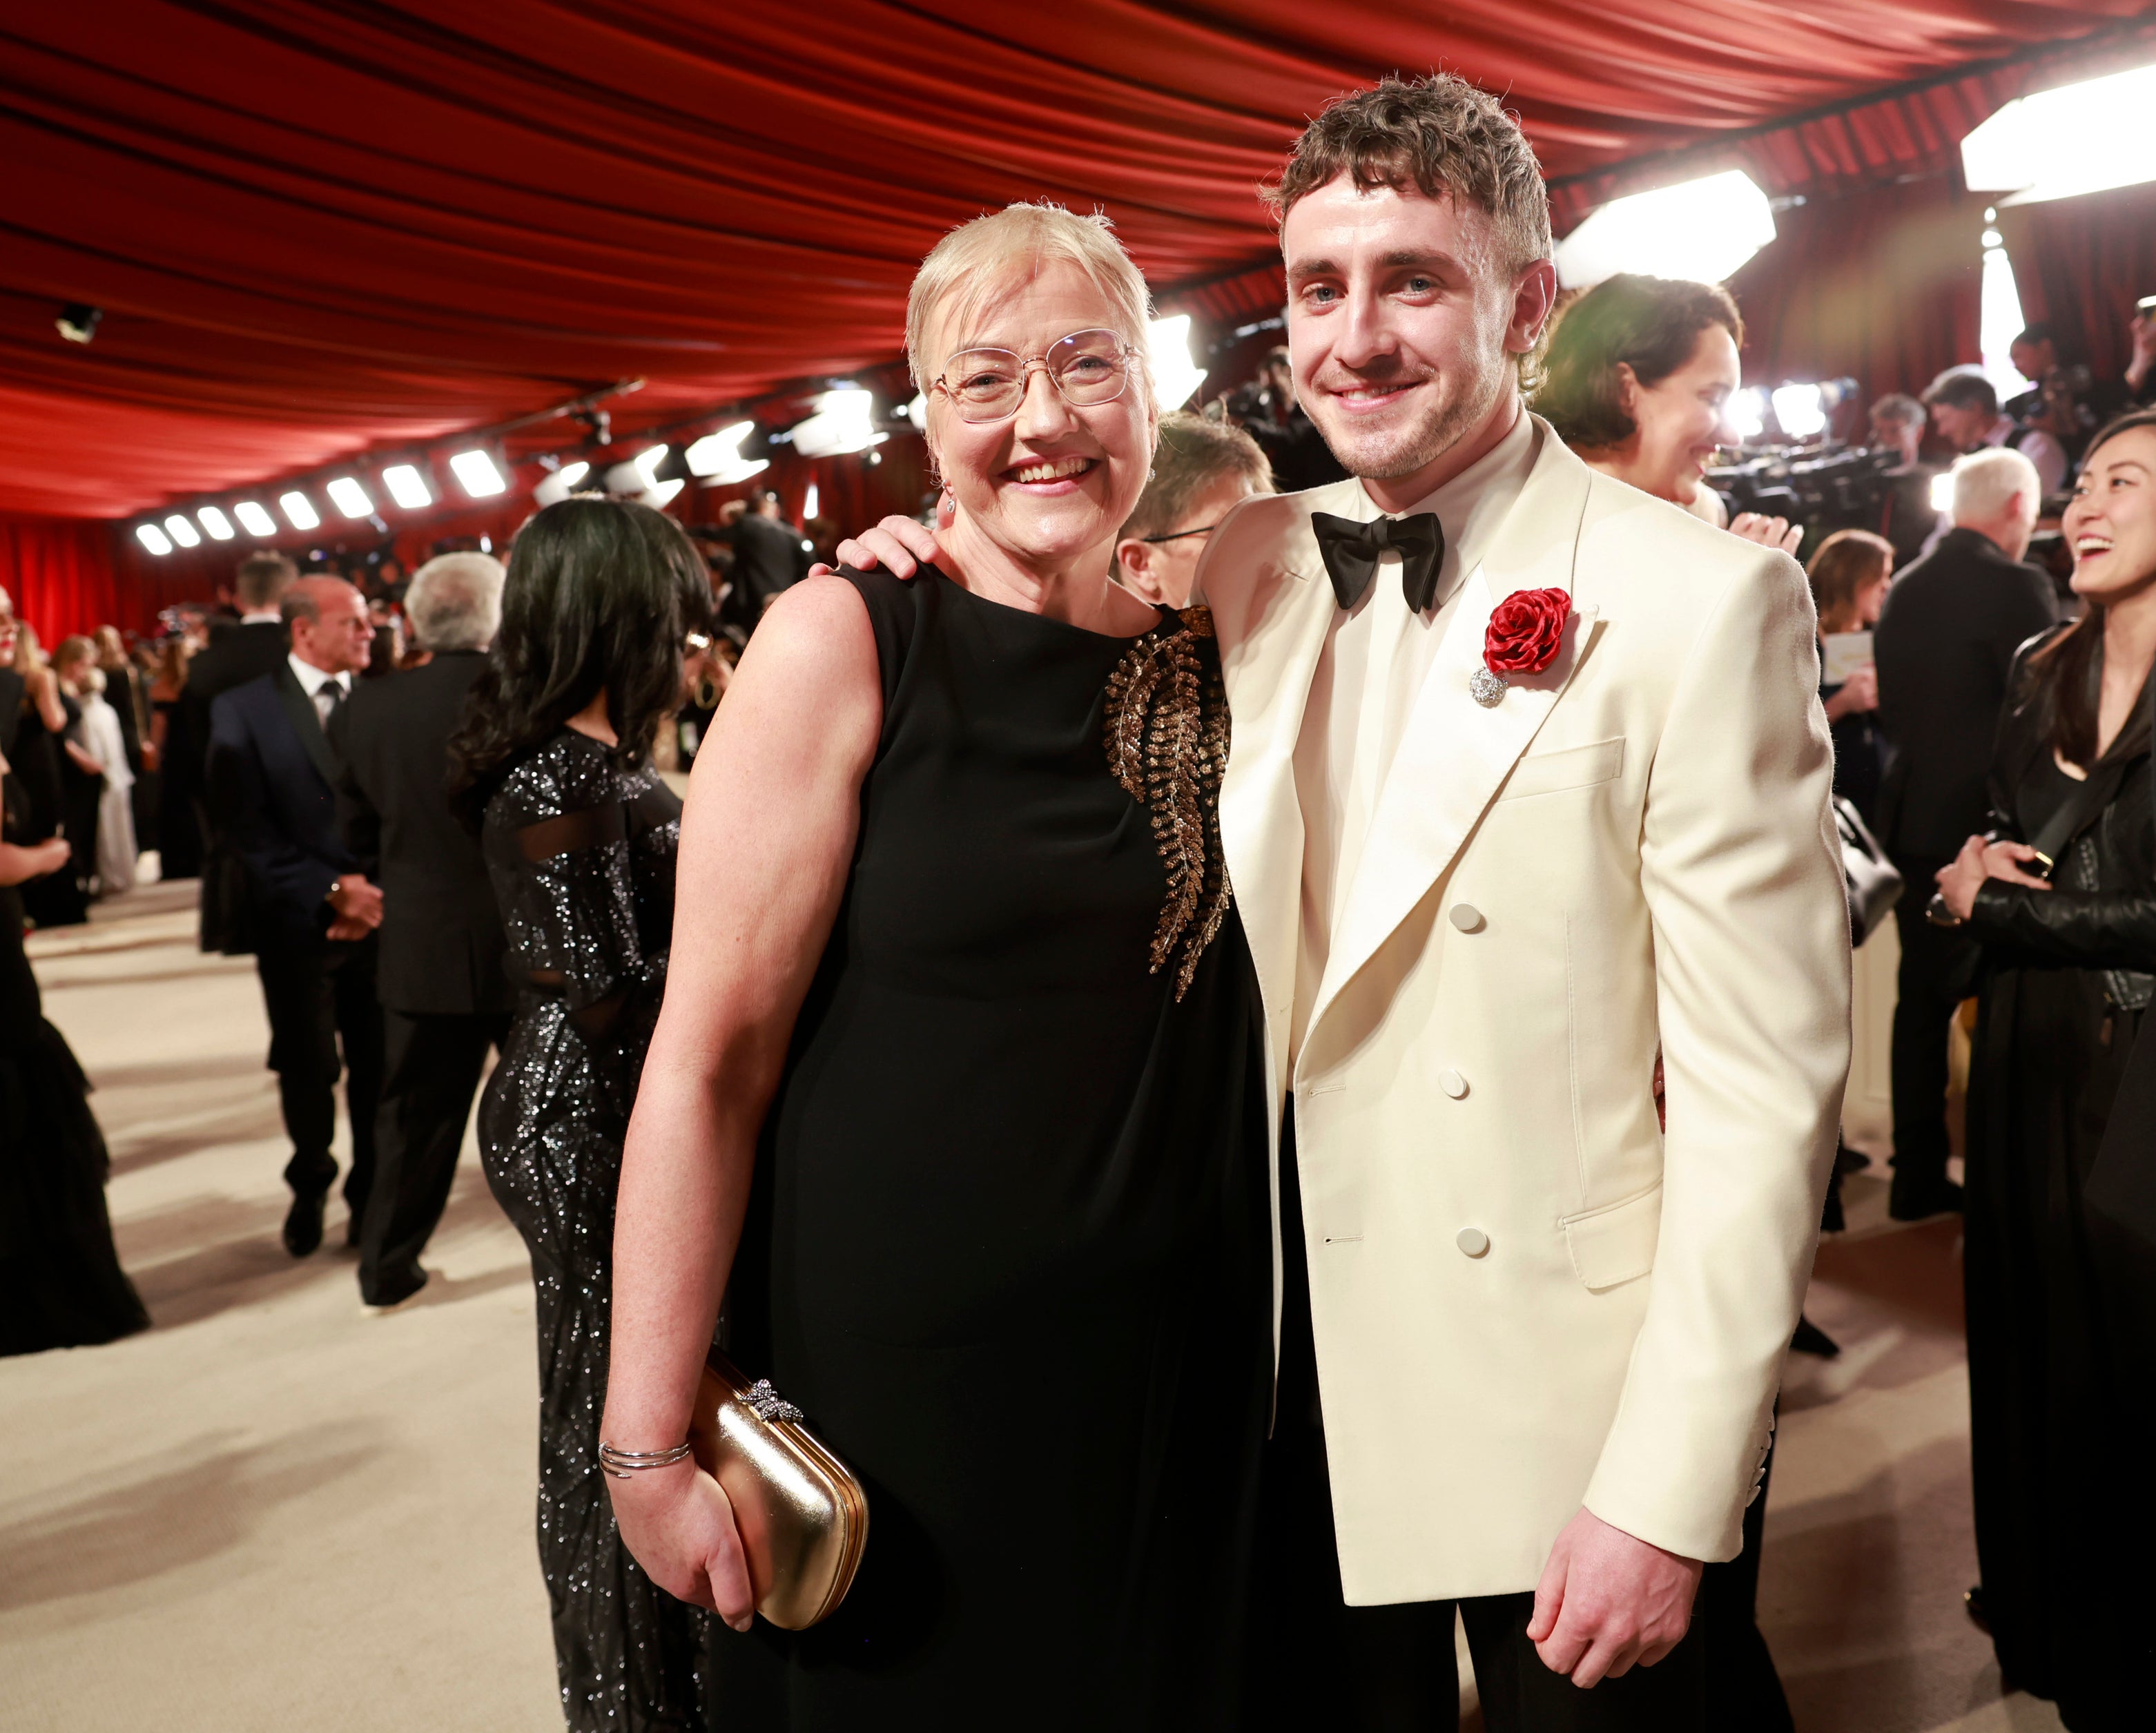 Paul and his mother smiling on the red carpet